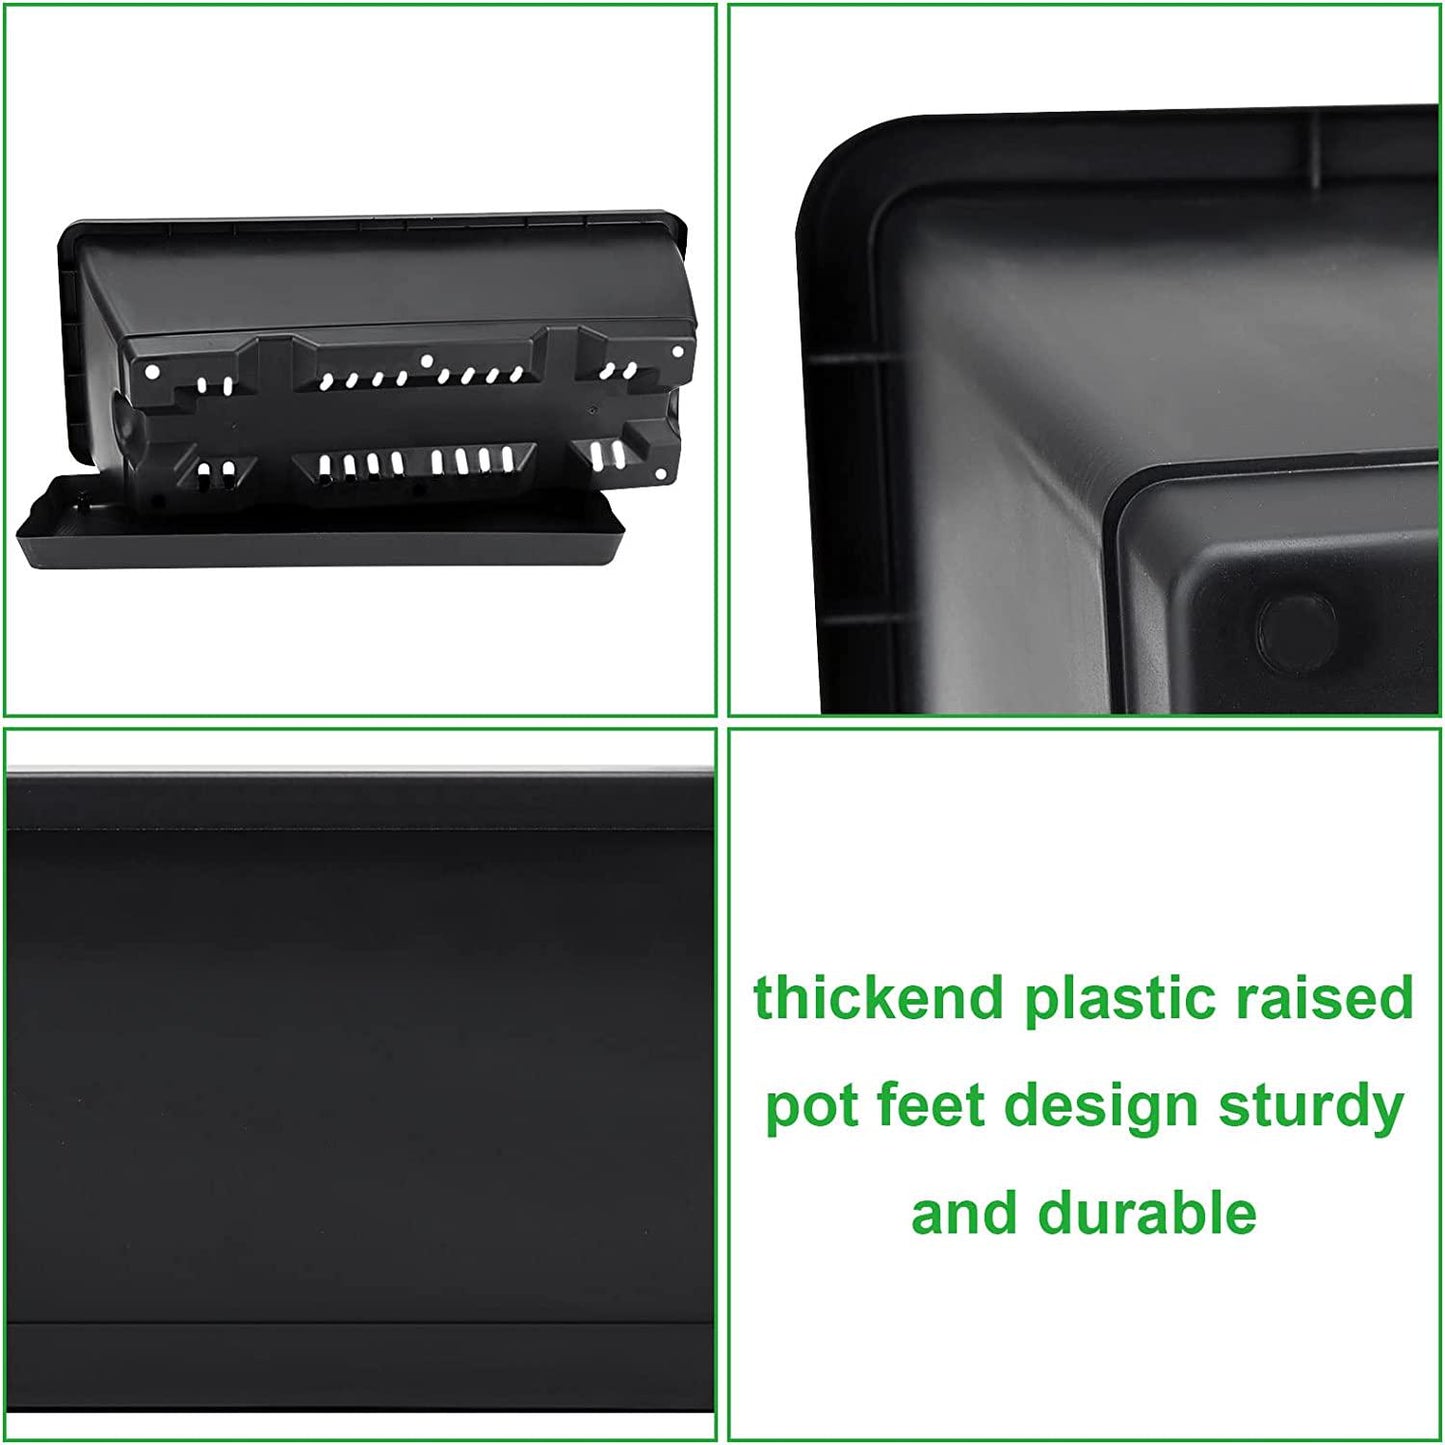 10Pcs Plastic Window Boxes Planters, Black Rectangle Flower Boxes, 16.6 x 6.7 x 5.5 inch Window Planter Boxes Outdoor with Drainage Holes and Trays